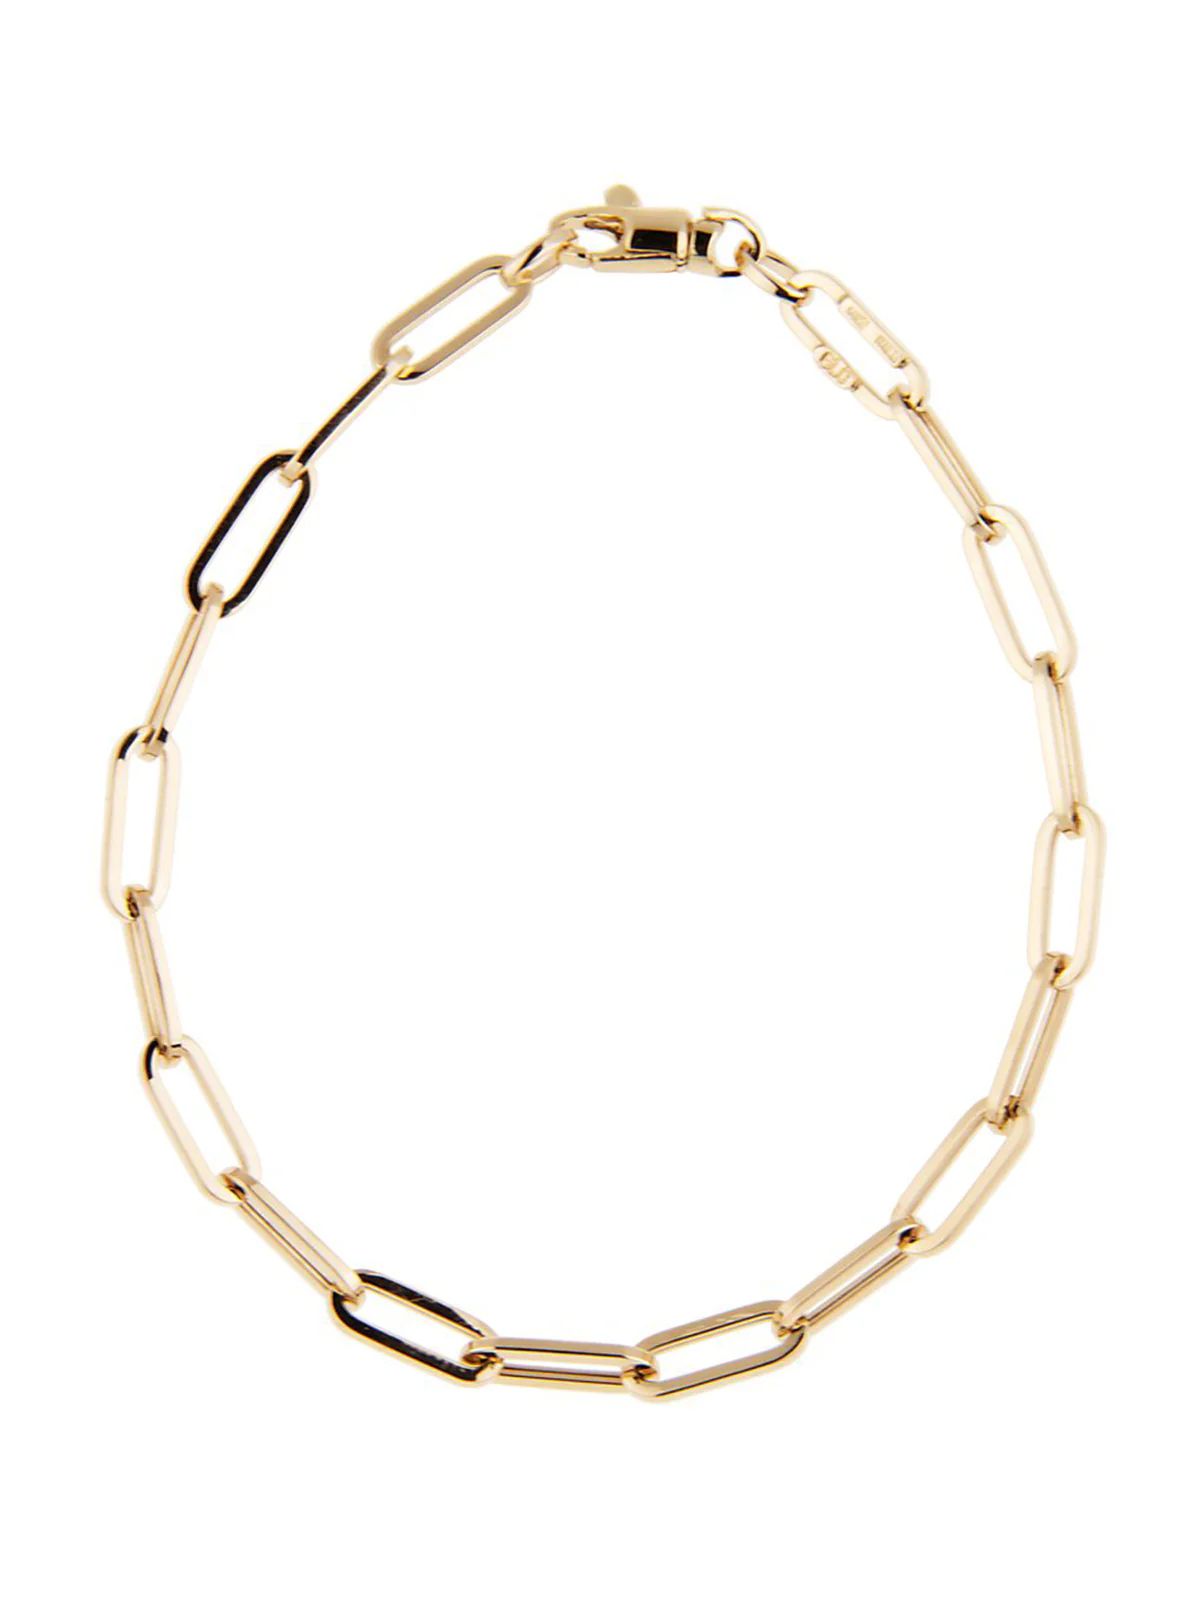 Small Link Paperclip Yellow Gold Chain Bracelet | YLANG 23